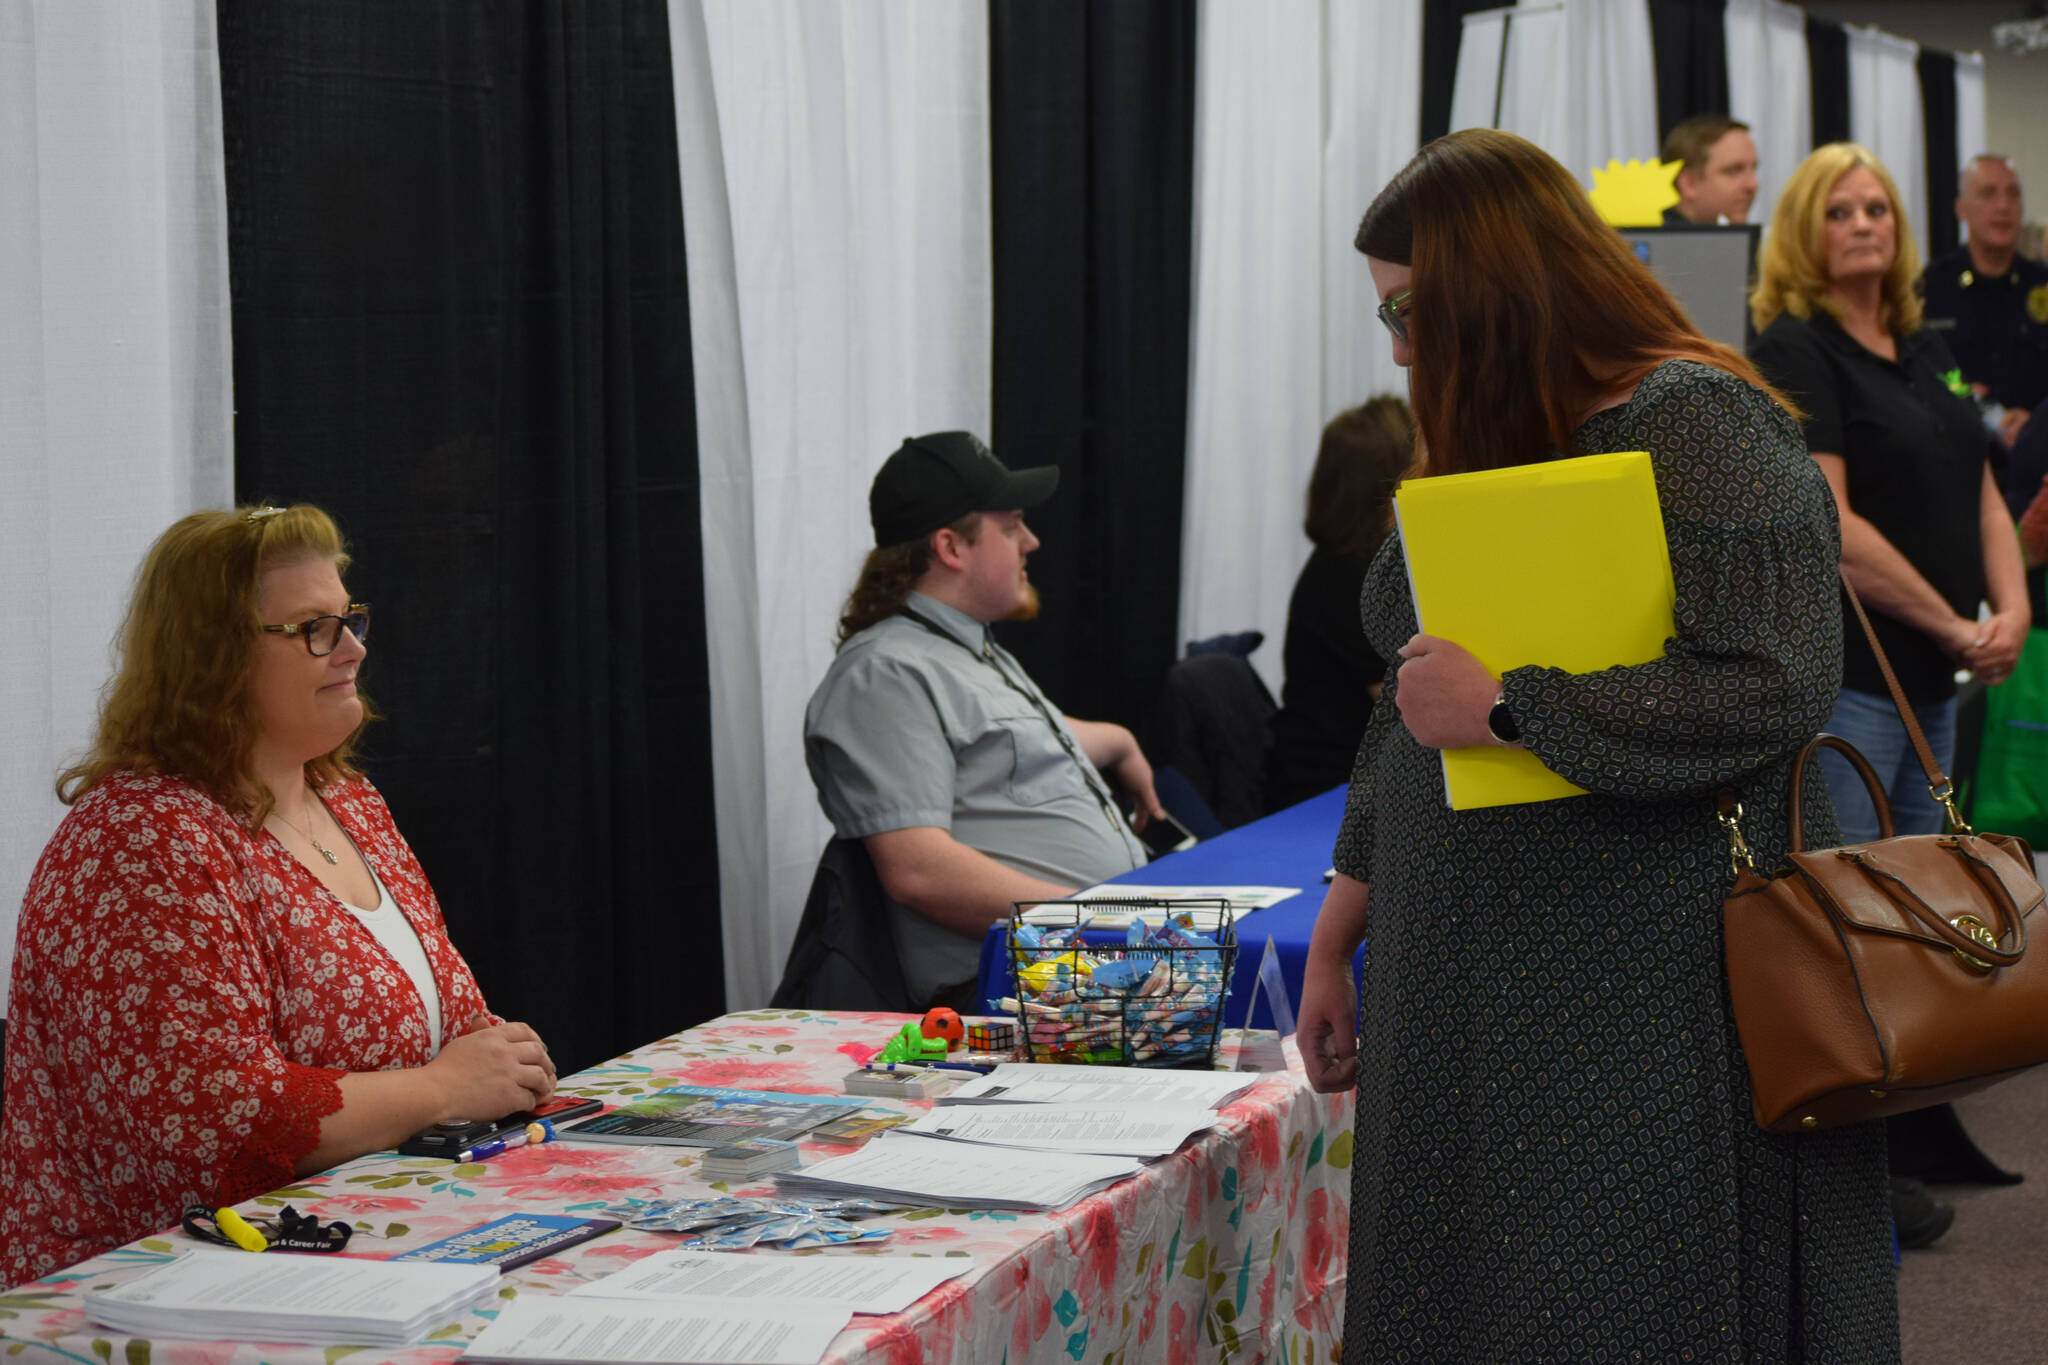 Community members participate in the Kenai Peninsula Job and Career Fair at the Soldotna Regional Sports Complex on Thursday, April 7, 2022. (Camille Botello/Peninsula Clarion)